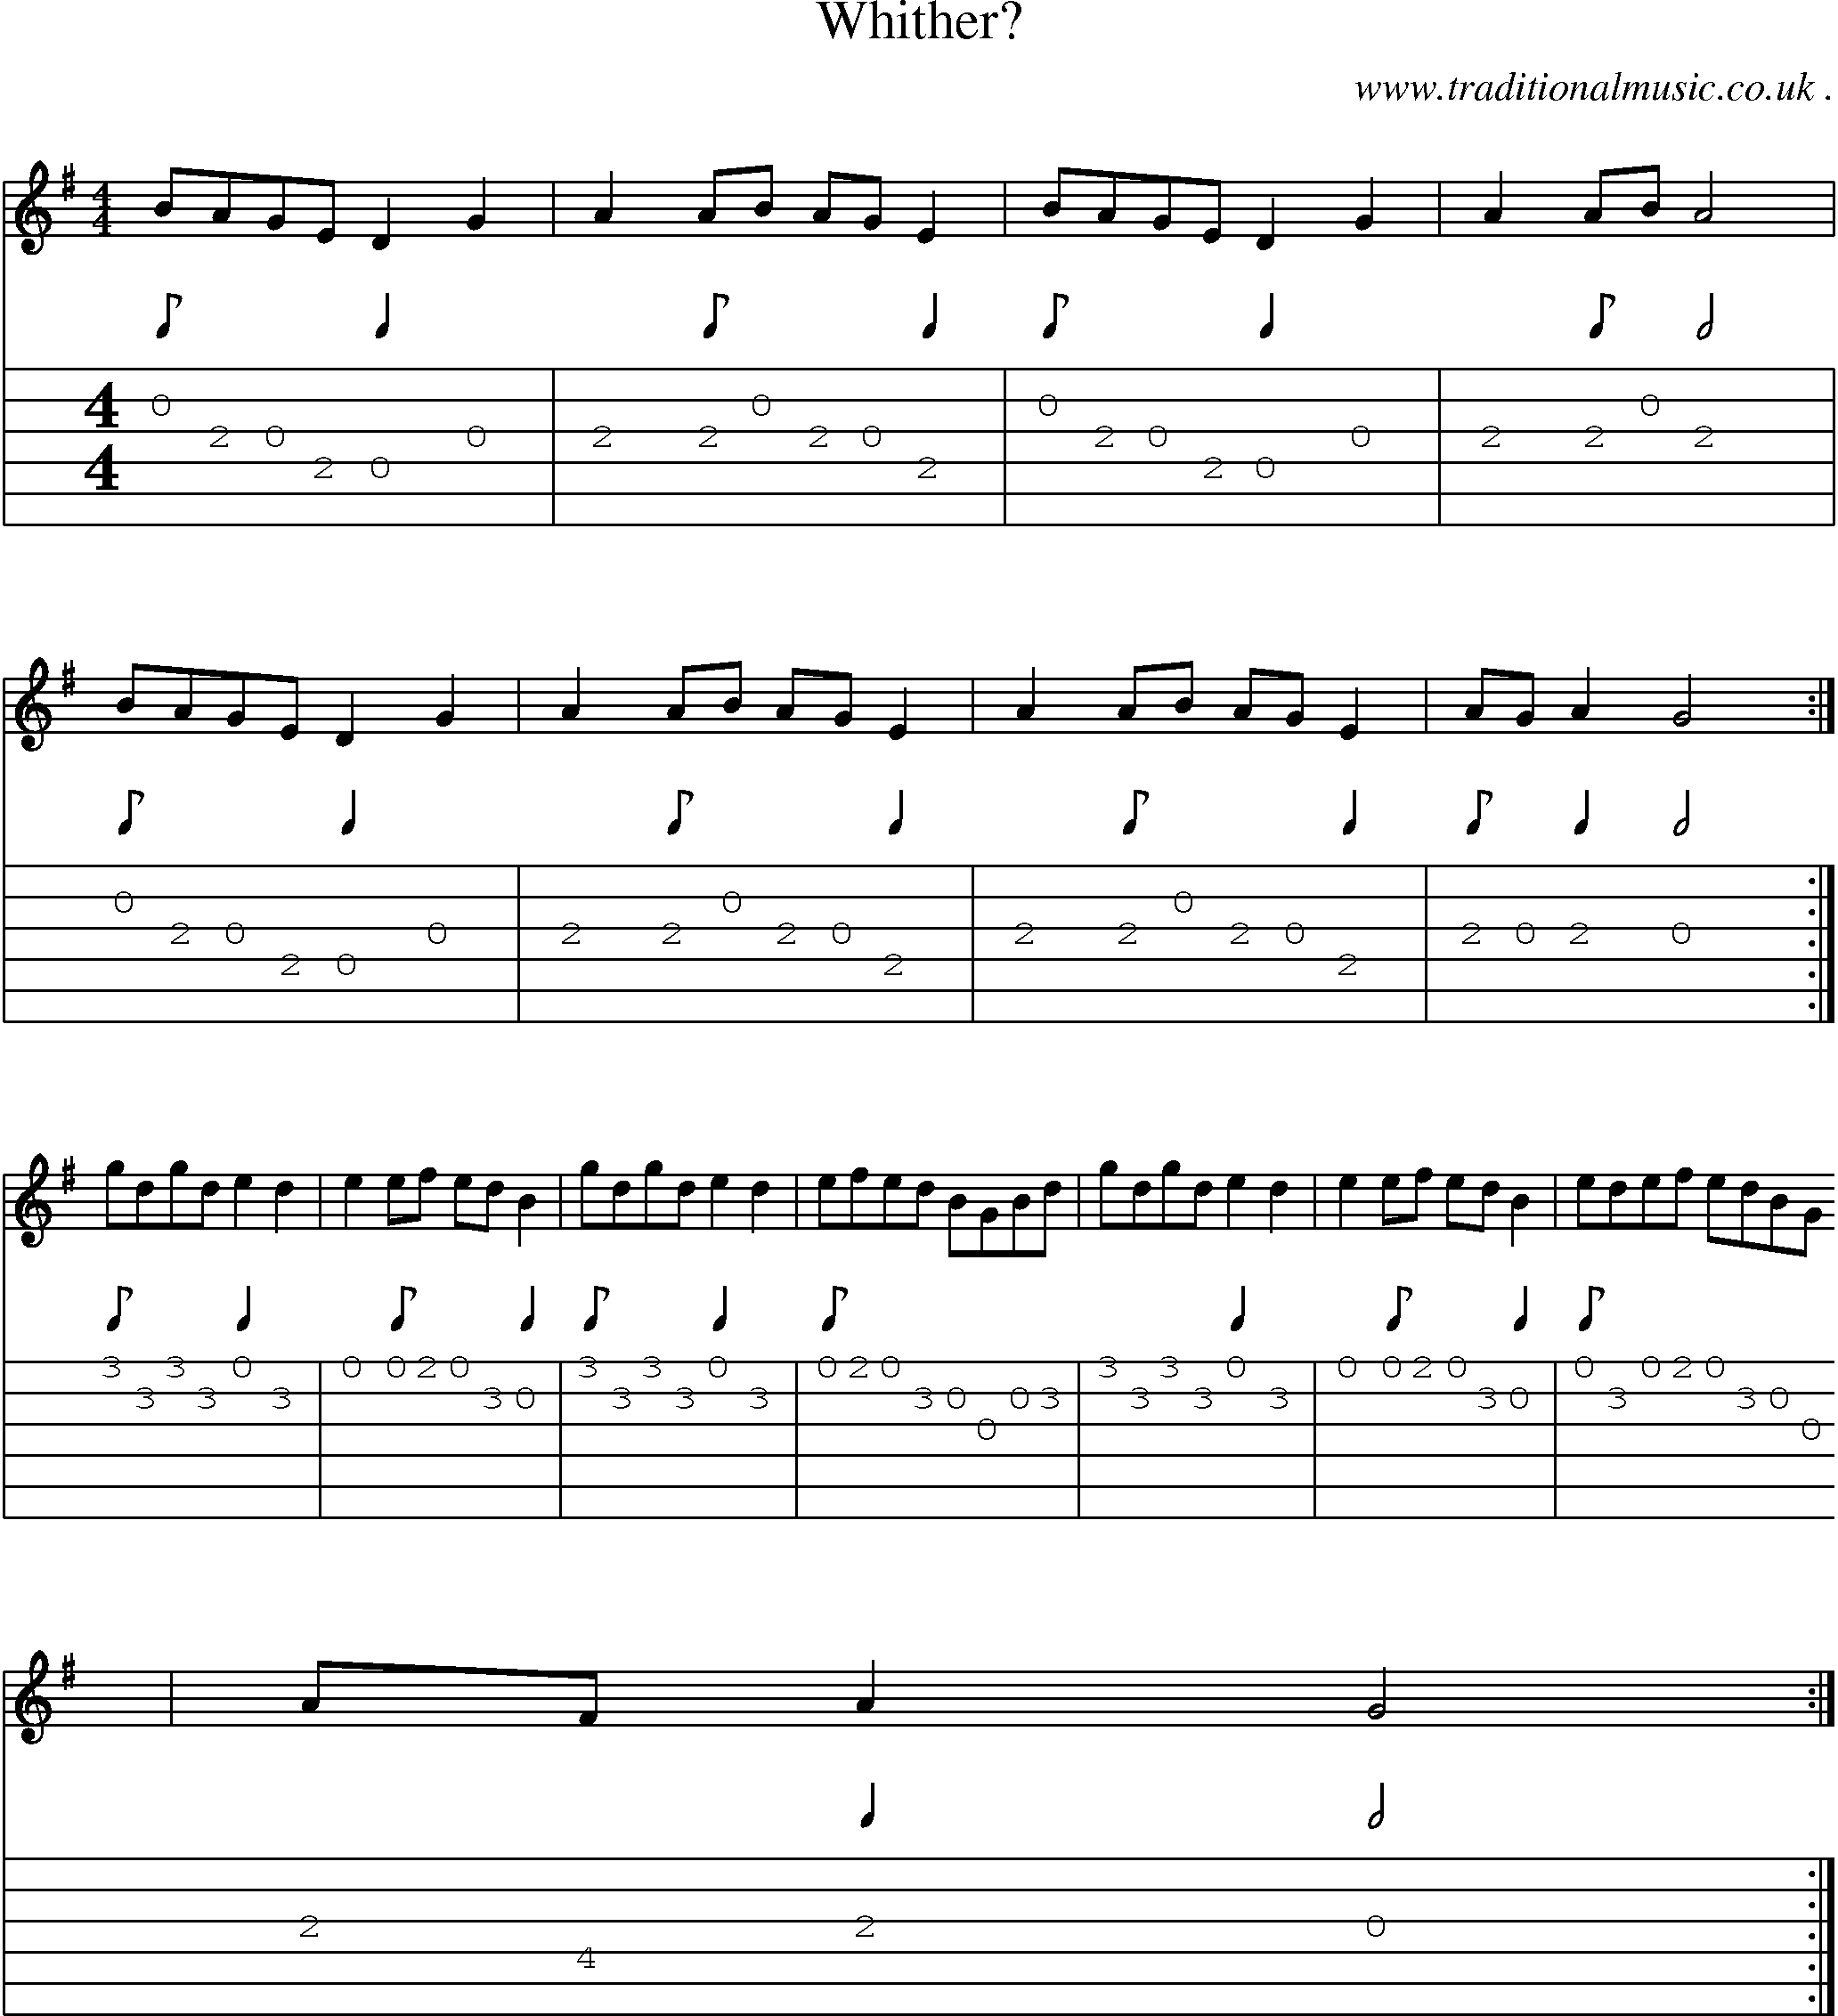 Sheet-Music and Guitar Tabs for Whither